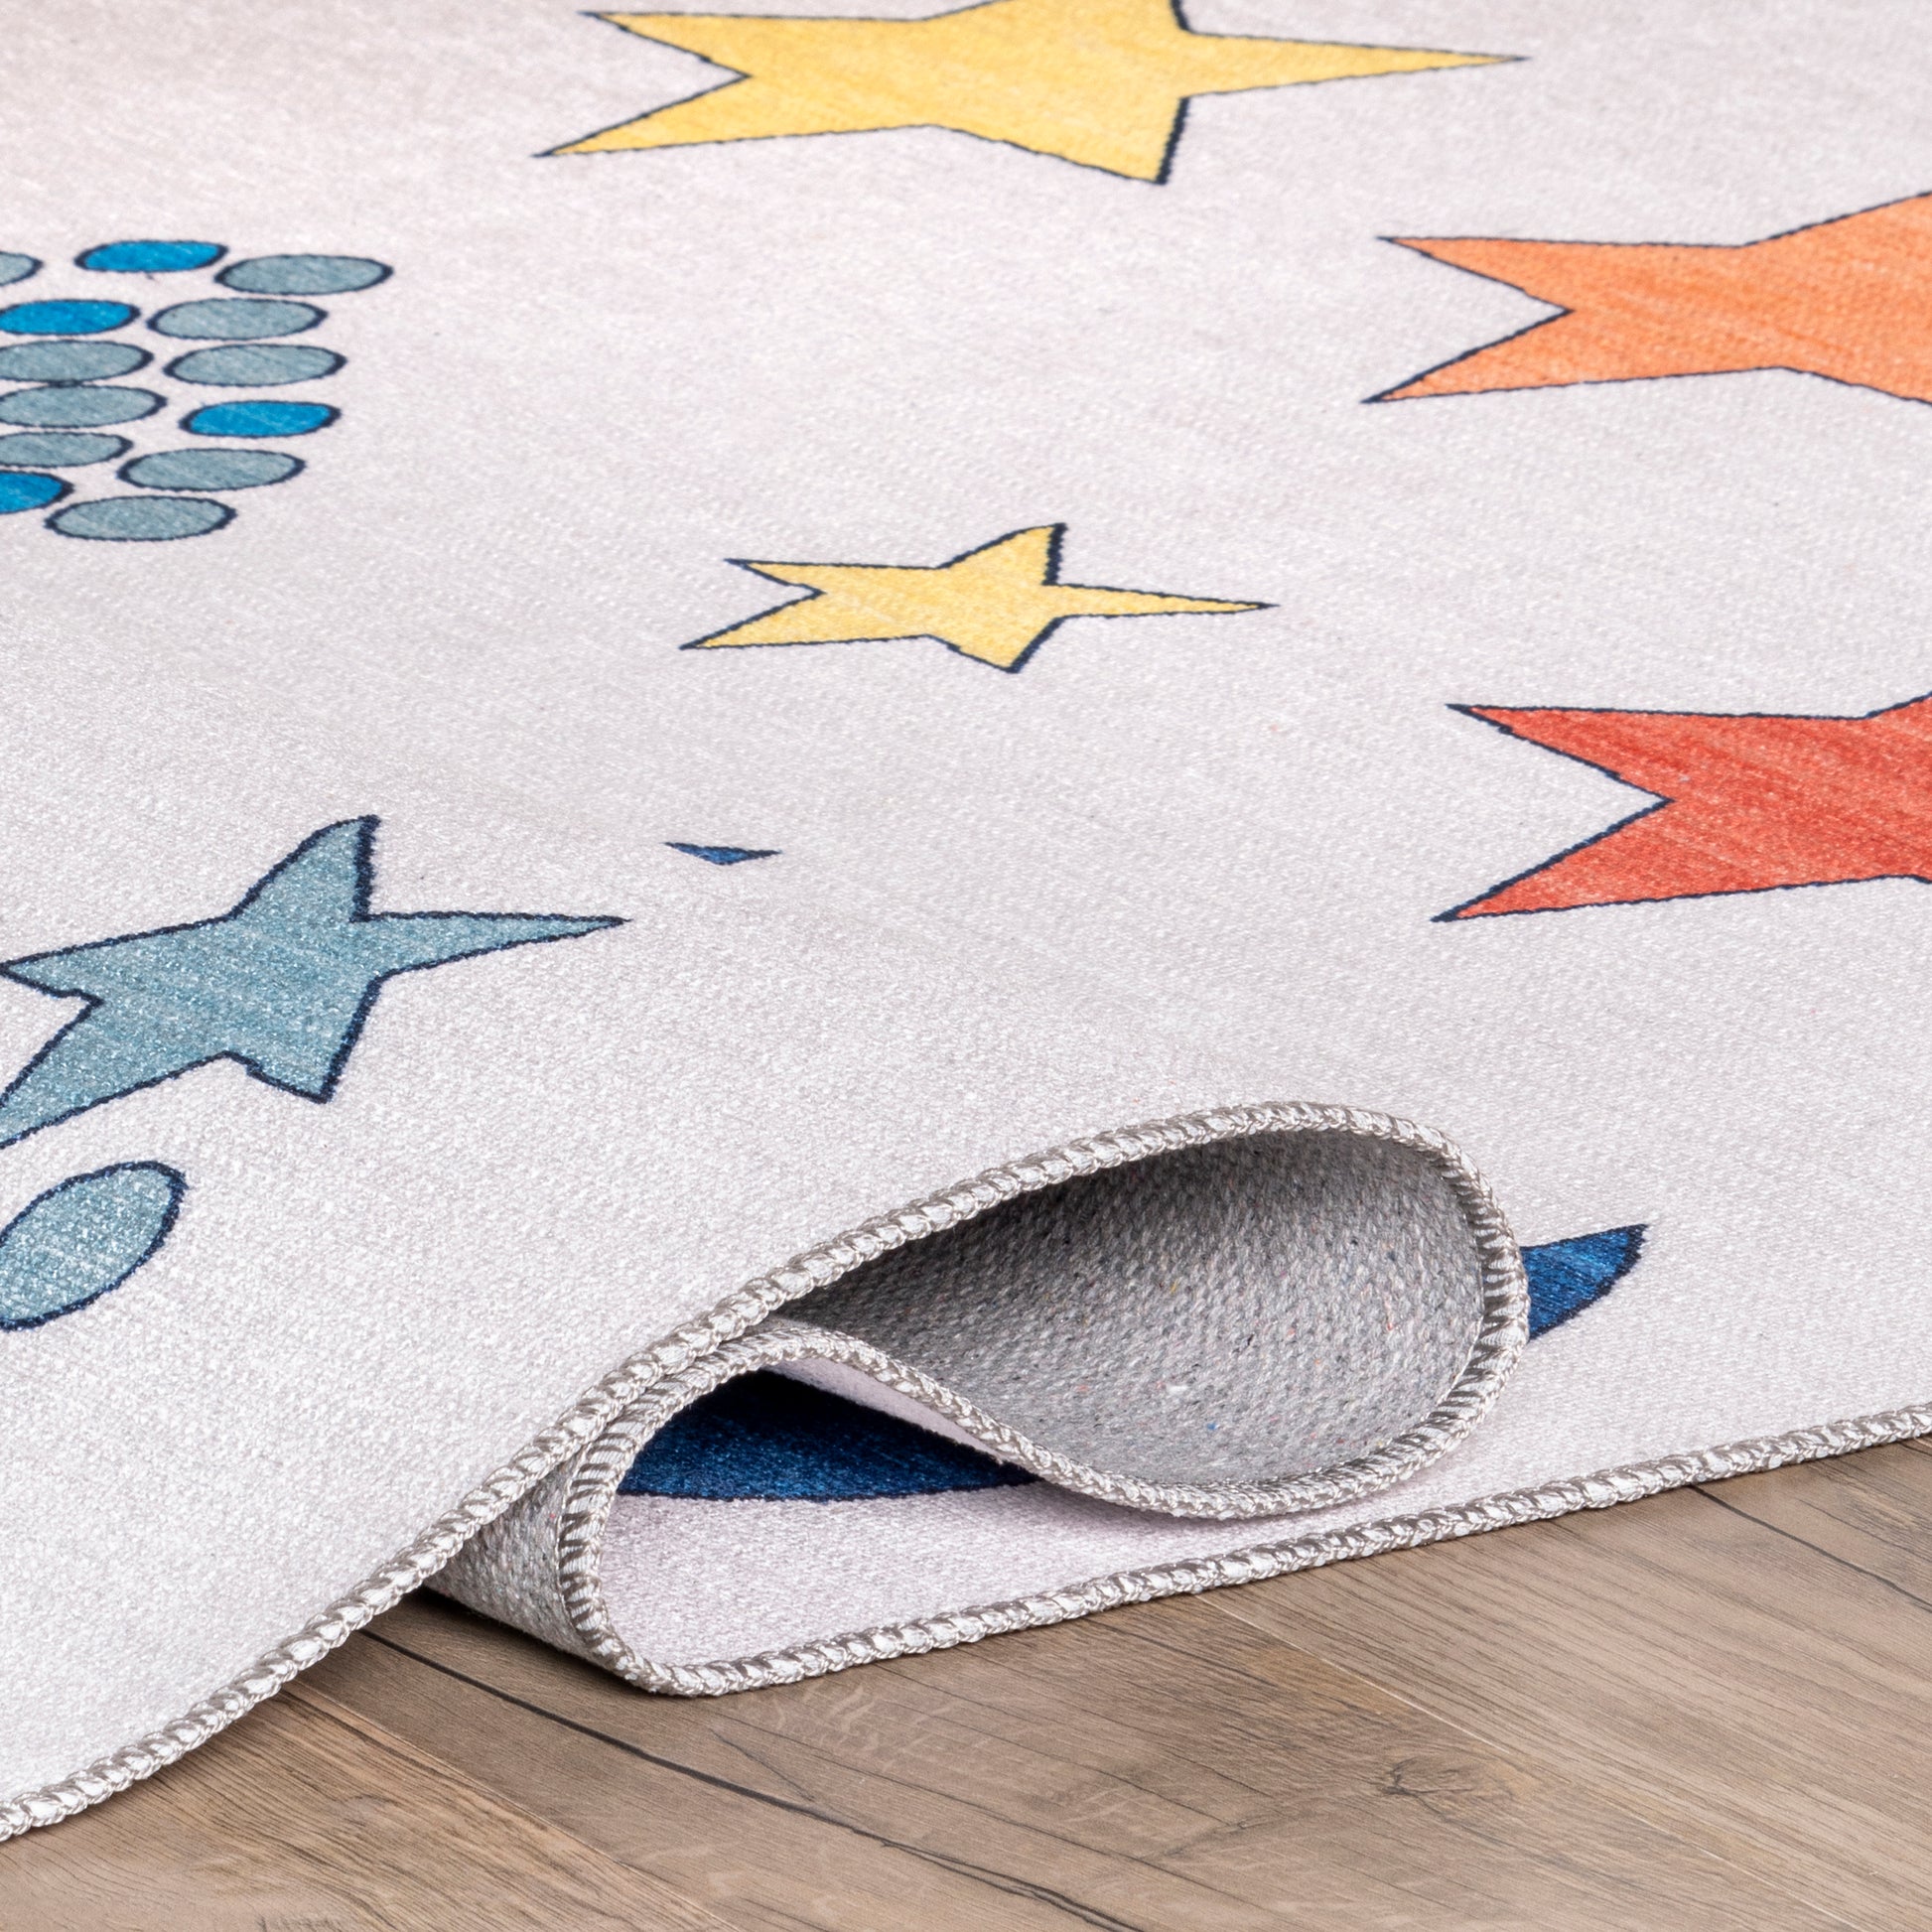 Nuloom Leonie Outer Space Kffx07A Multi Area Rug